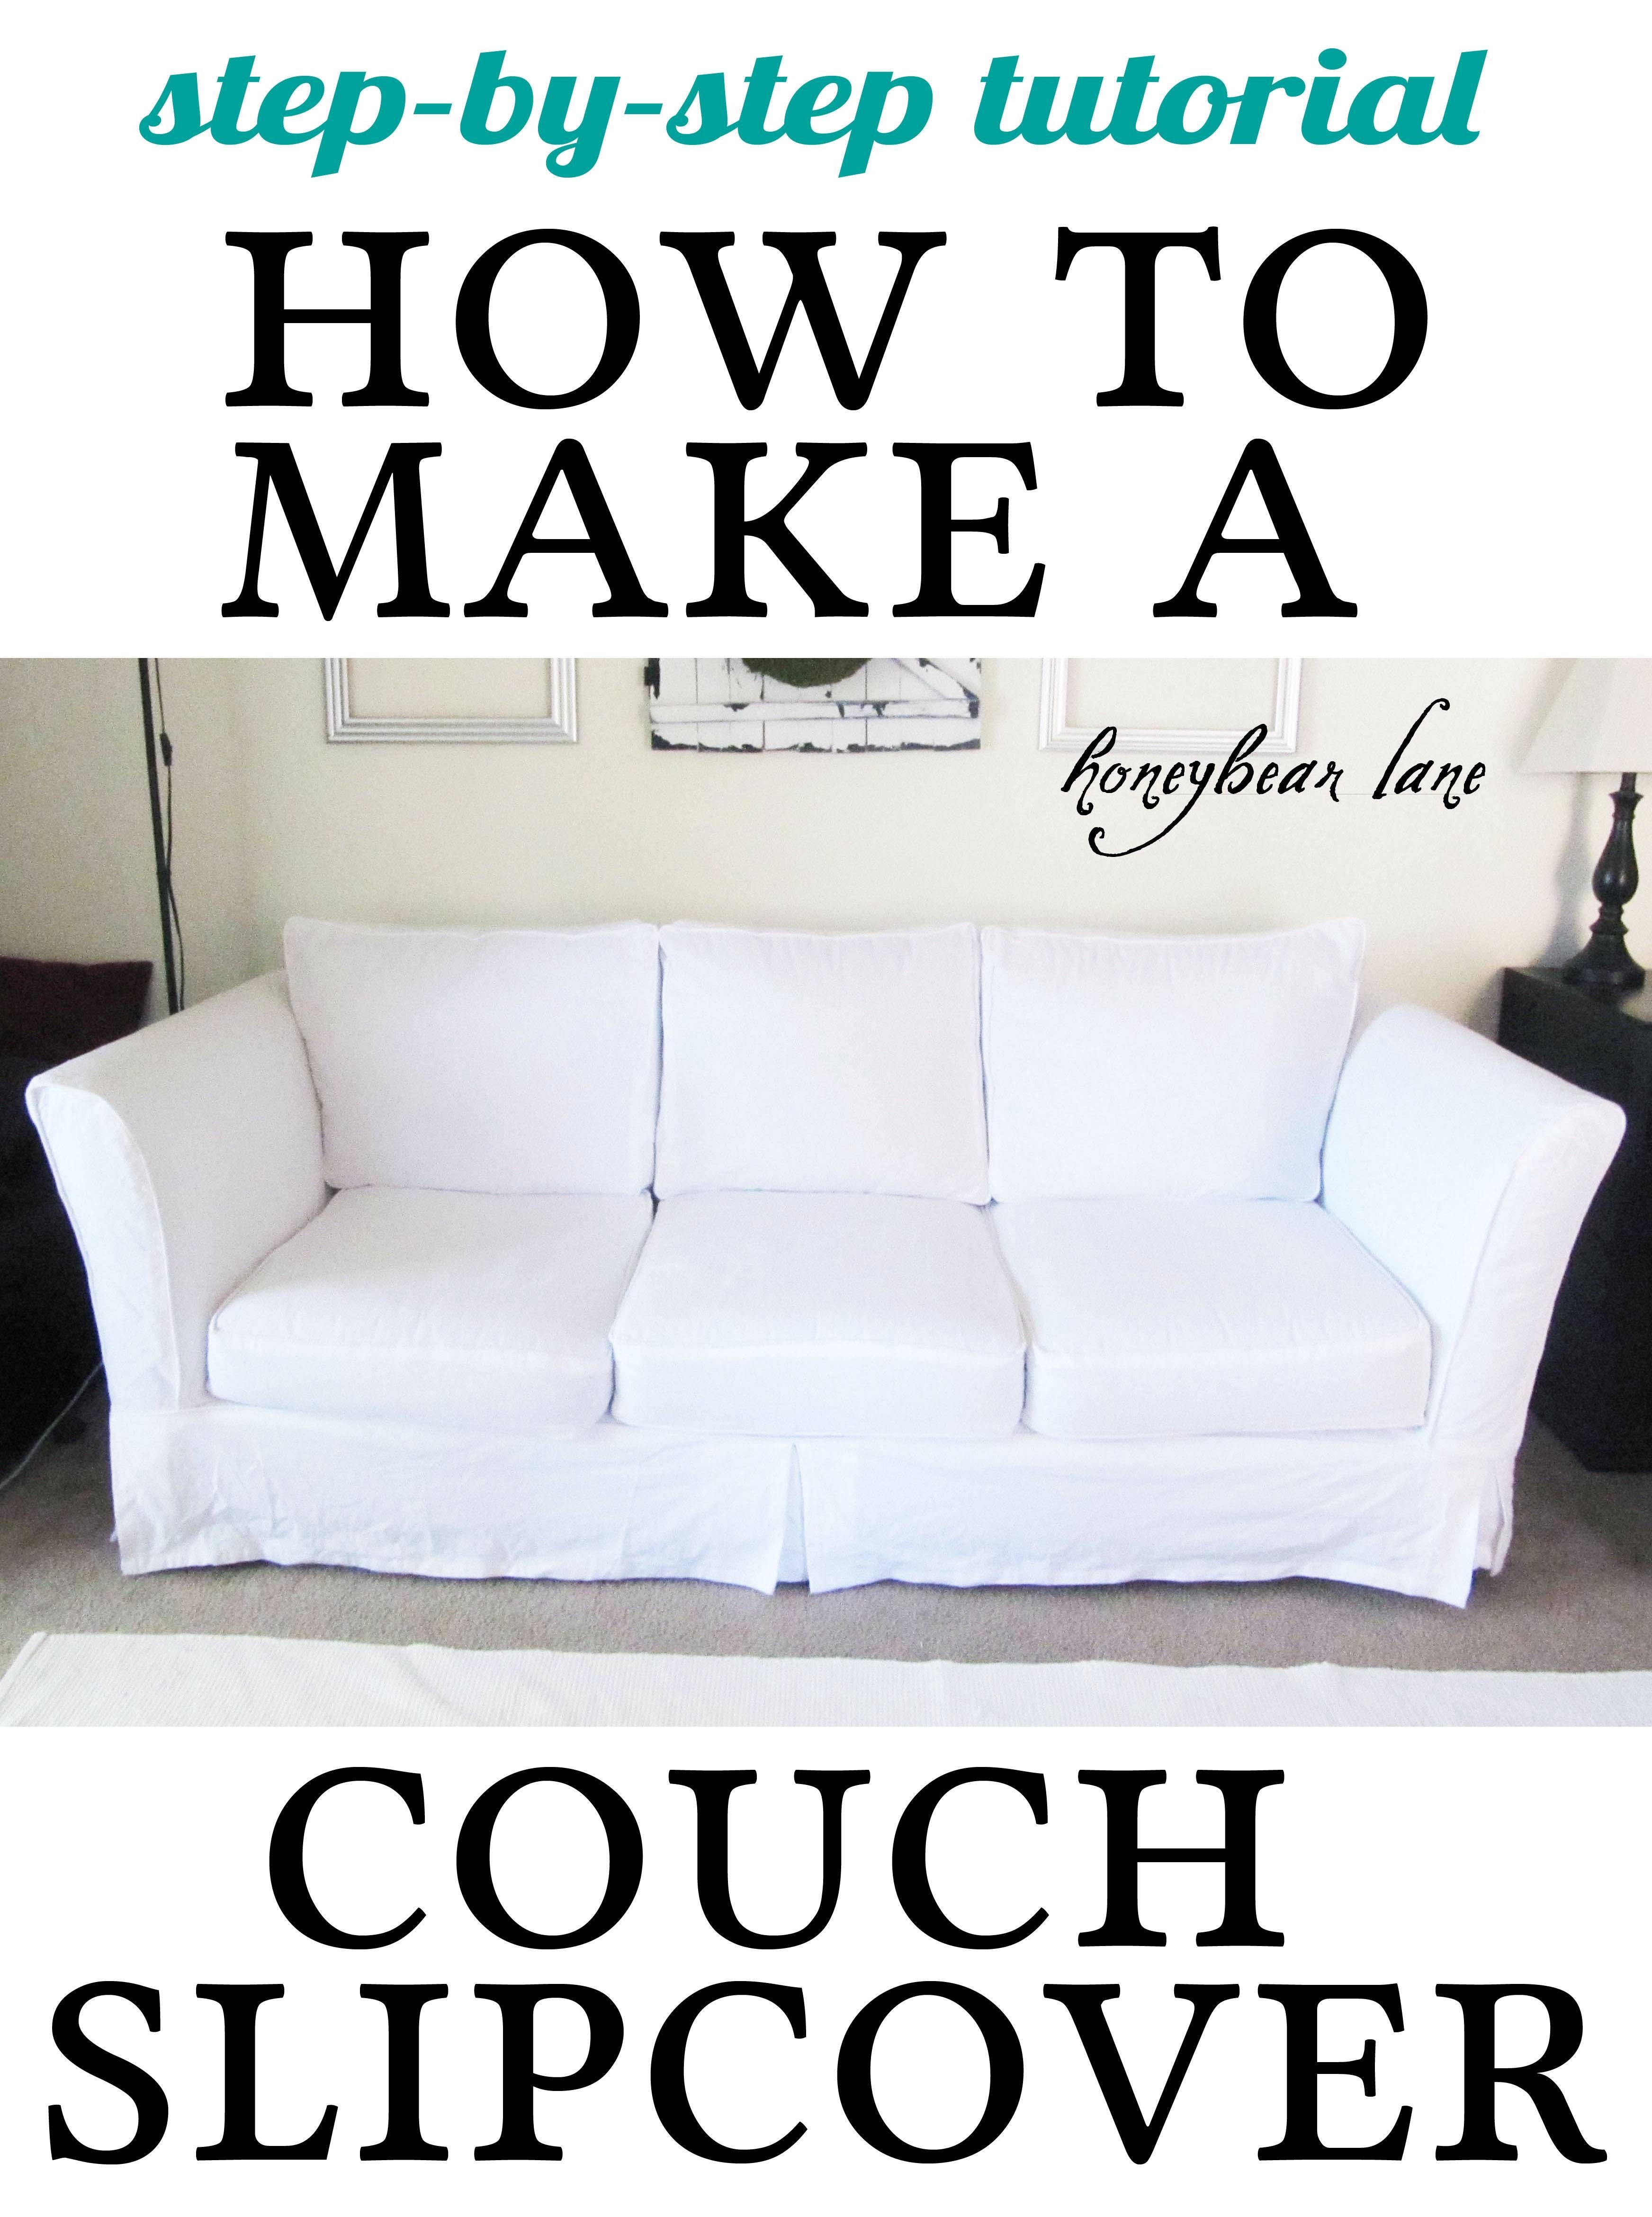 Decor: Ikea Futon Cover | Target Slipcovers | Sofas At Target Within Patterned Sofa Slipcovers (View 4 of 15)